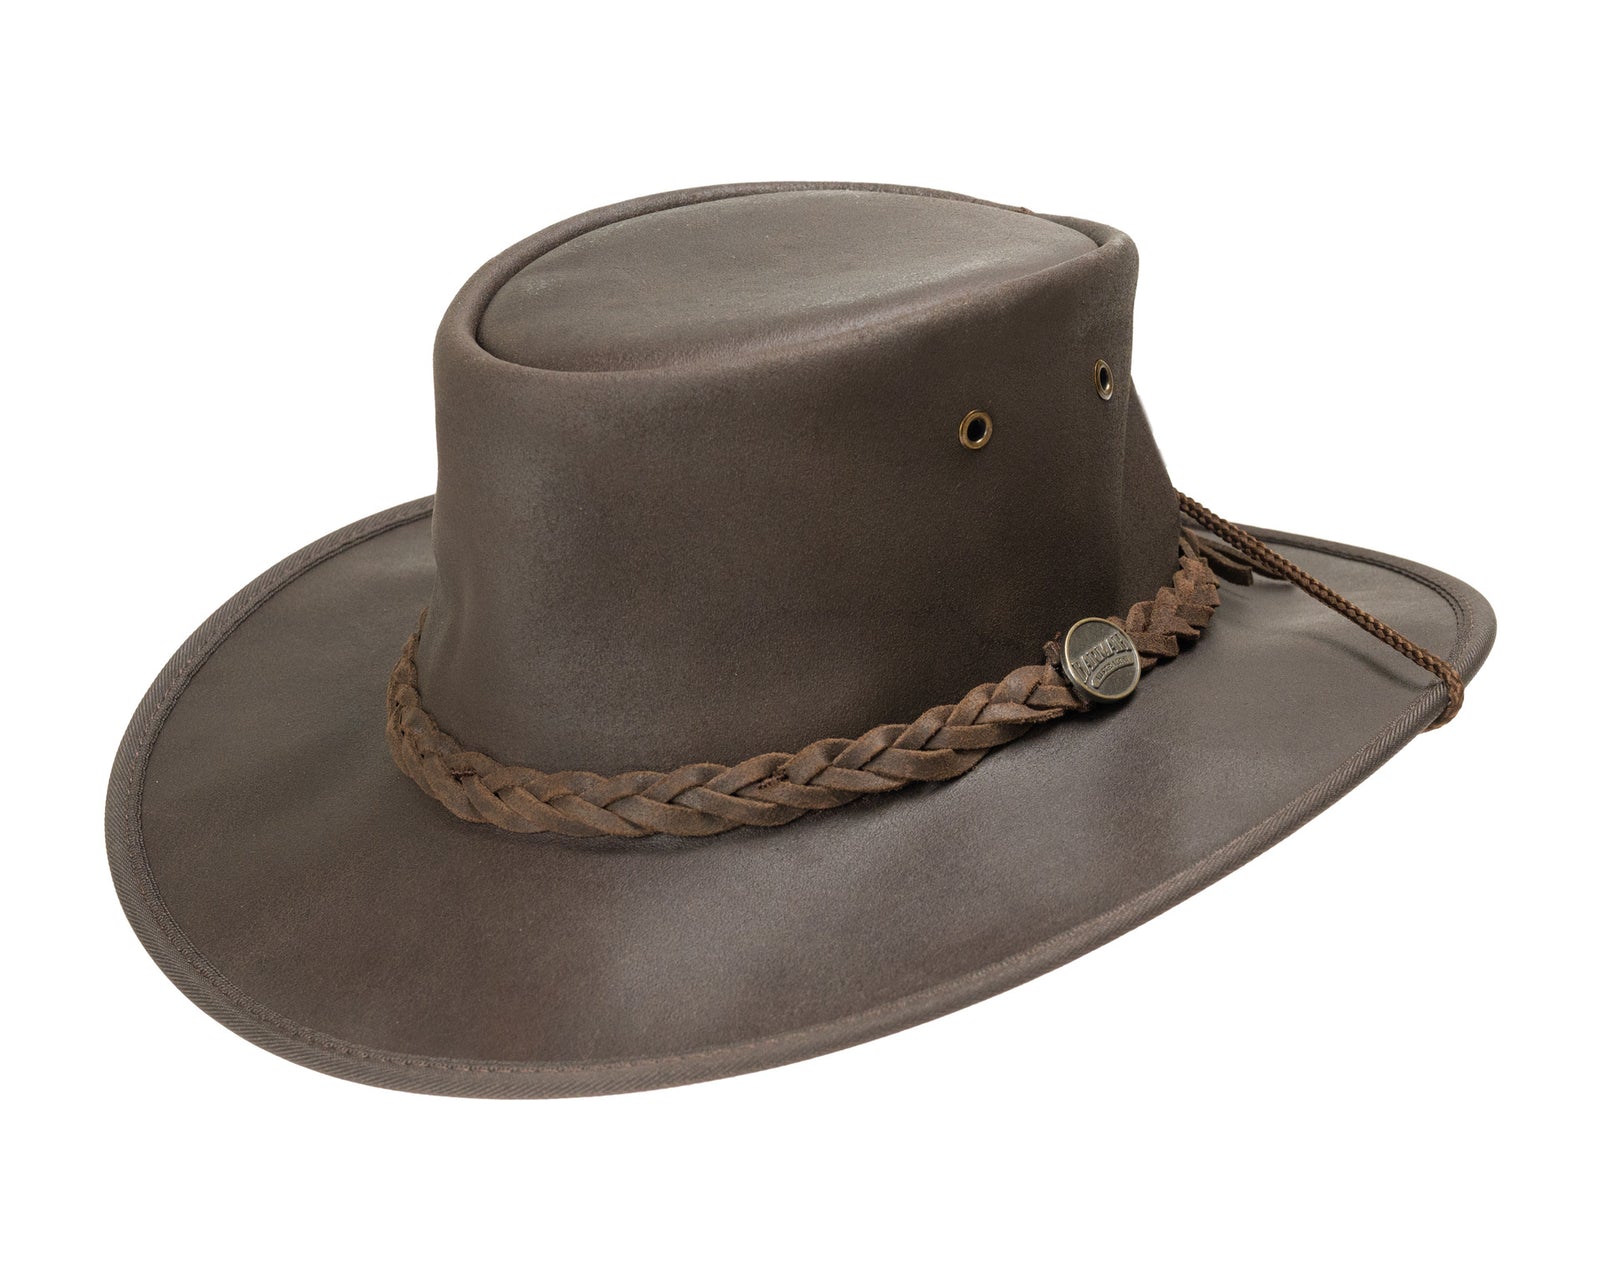 Barmah Hats Australian Suede Leather Cooler Hat Made in Australia Cocoa  Brown Mesh Crown with Cord Chin Strap Size Medium